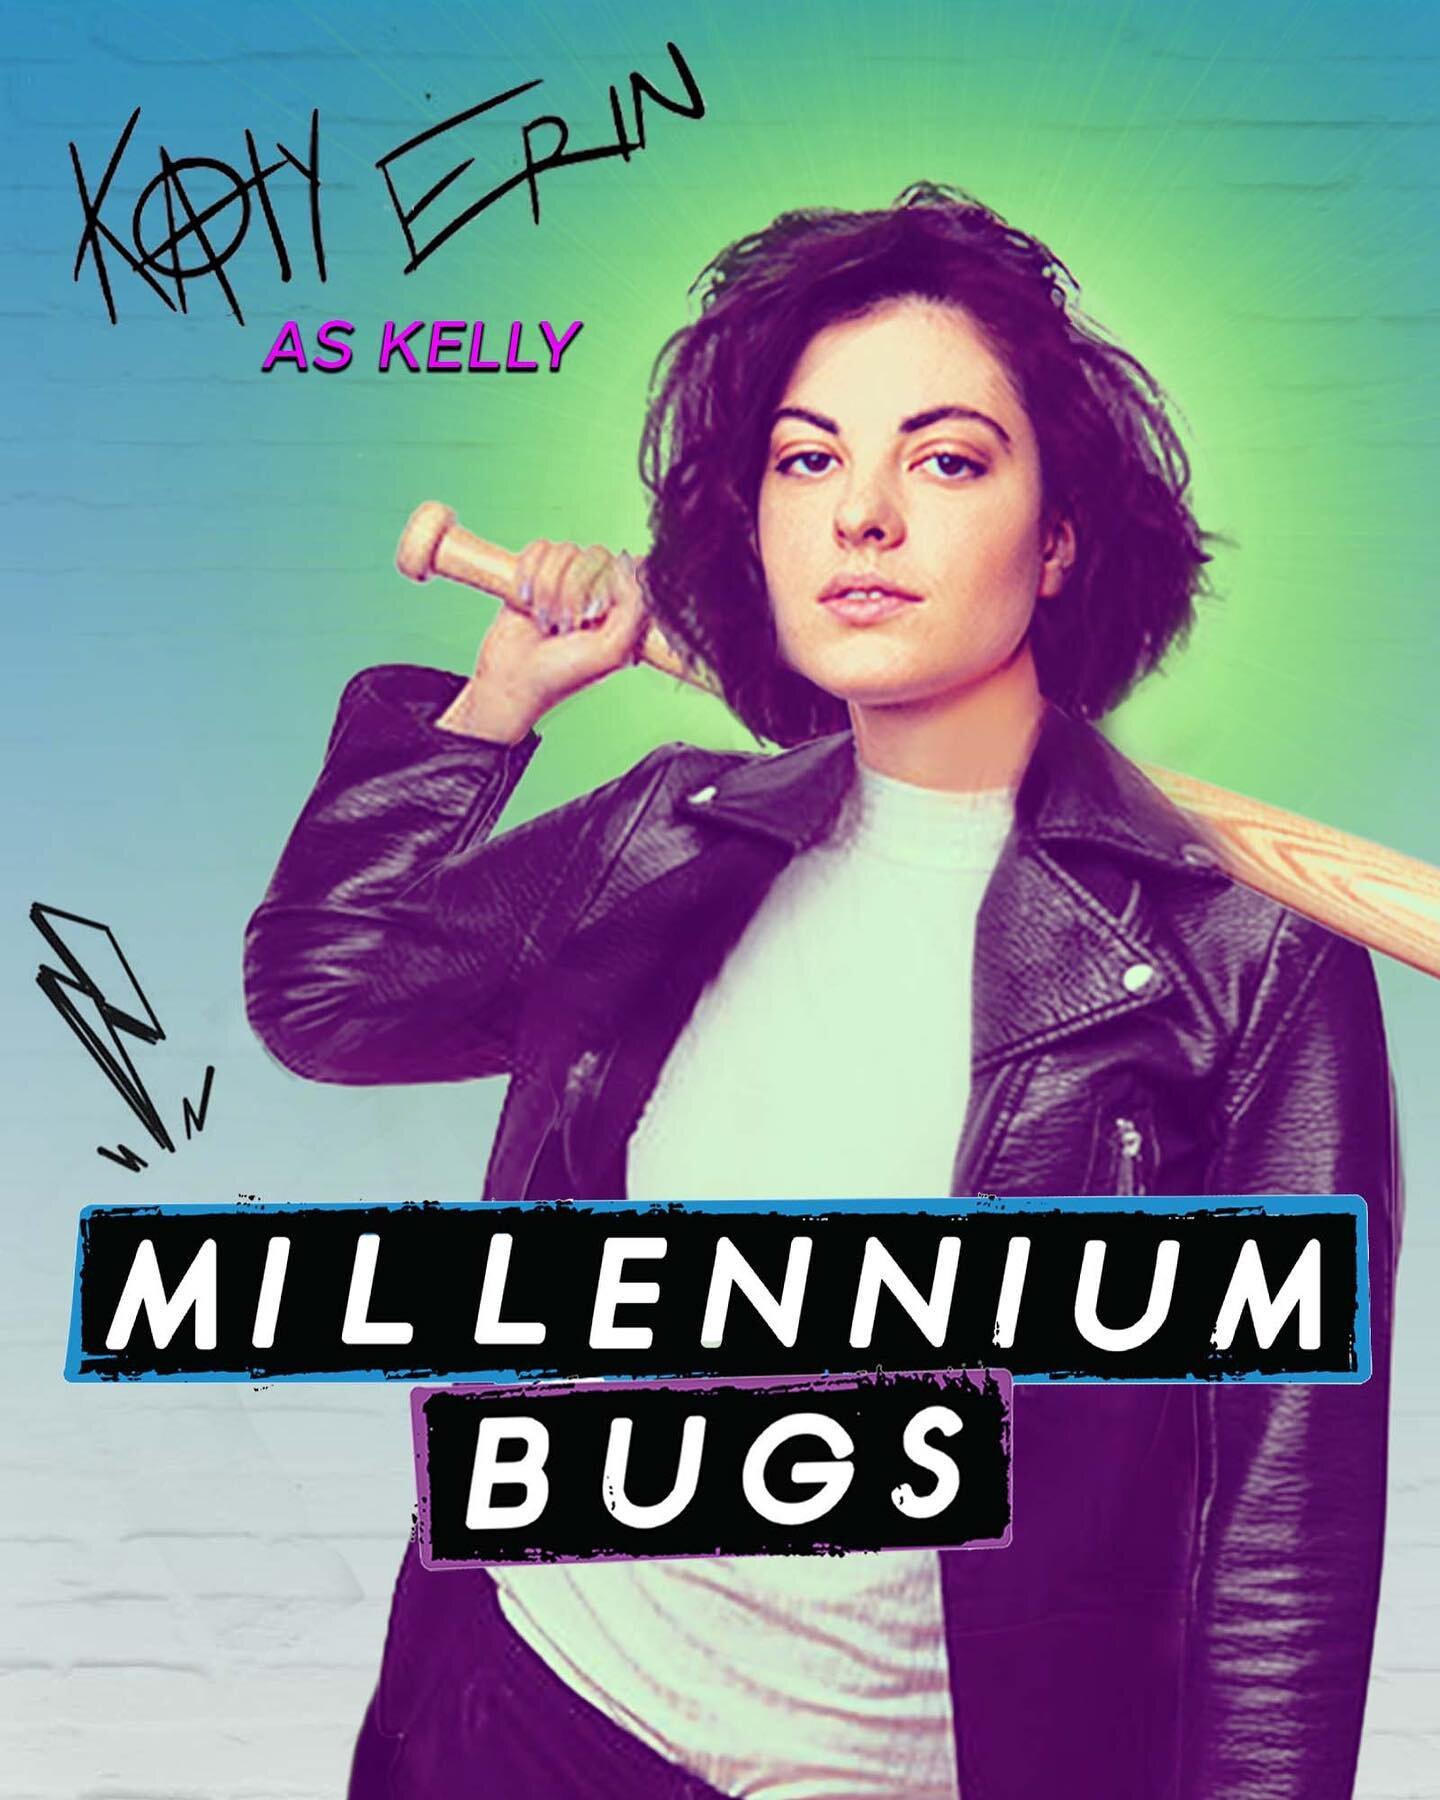 Introducing the stars of your new favorite Y2K comedy 

You&rsquo;re gonna want to see what kind of trouble these two get into in &lsquo;Millennium Bugs&rsquo;

Available to buy and rent now!

#y2kaesthetic #newmovie #comedymovie #watchnow #rent #mus